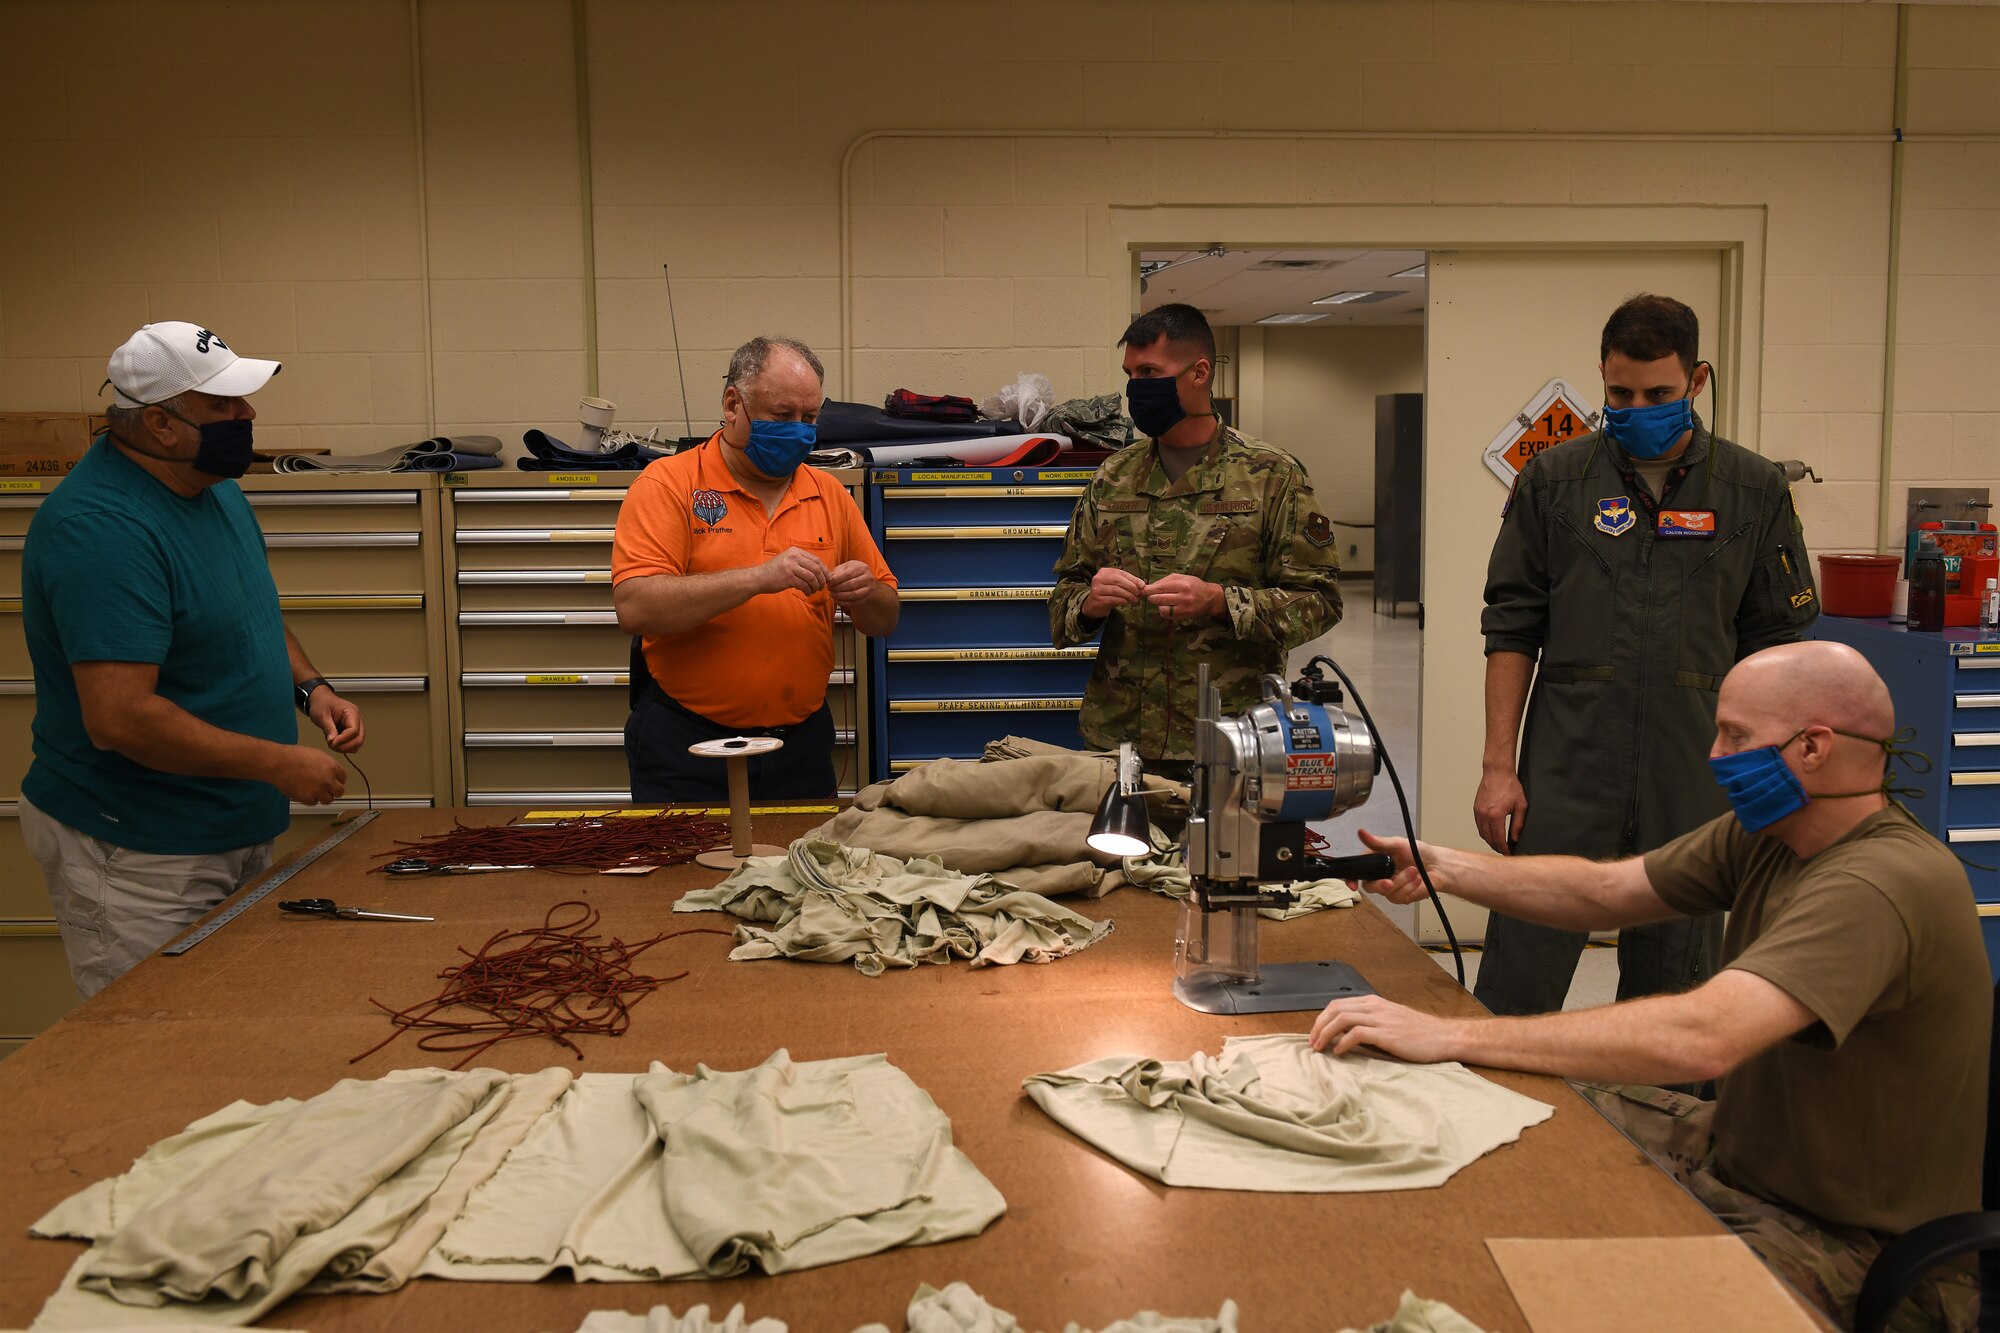 ALTUS AIR FORCE BASE, Okla. - Members of the 97th Operations Support Squadron, Air Crew Flight Equipment (AFE) flight, assemble face masks for base members, April 6, 2020 at Altus Air Force Base Oklahoma.